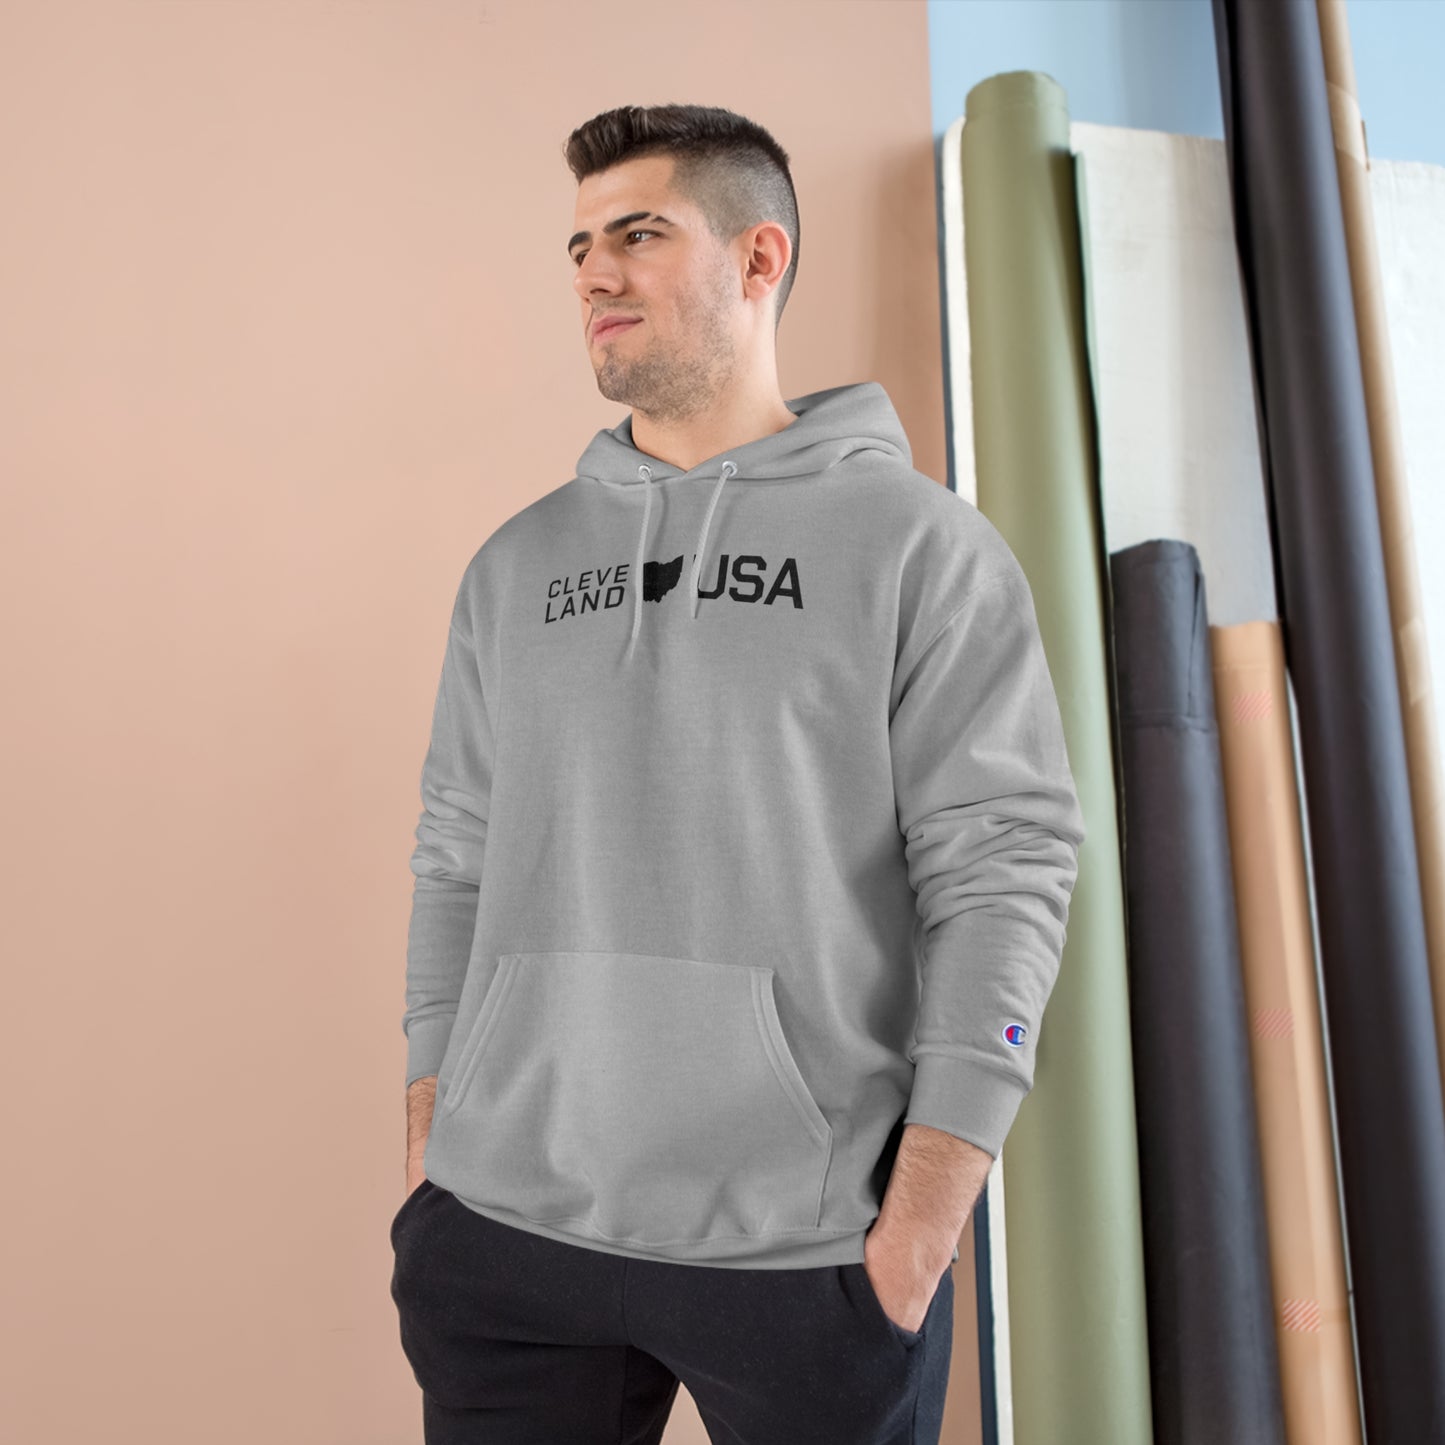 CLEVE LAND. USA (simple) – Champion Hoodie